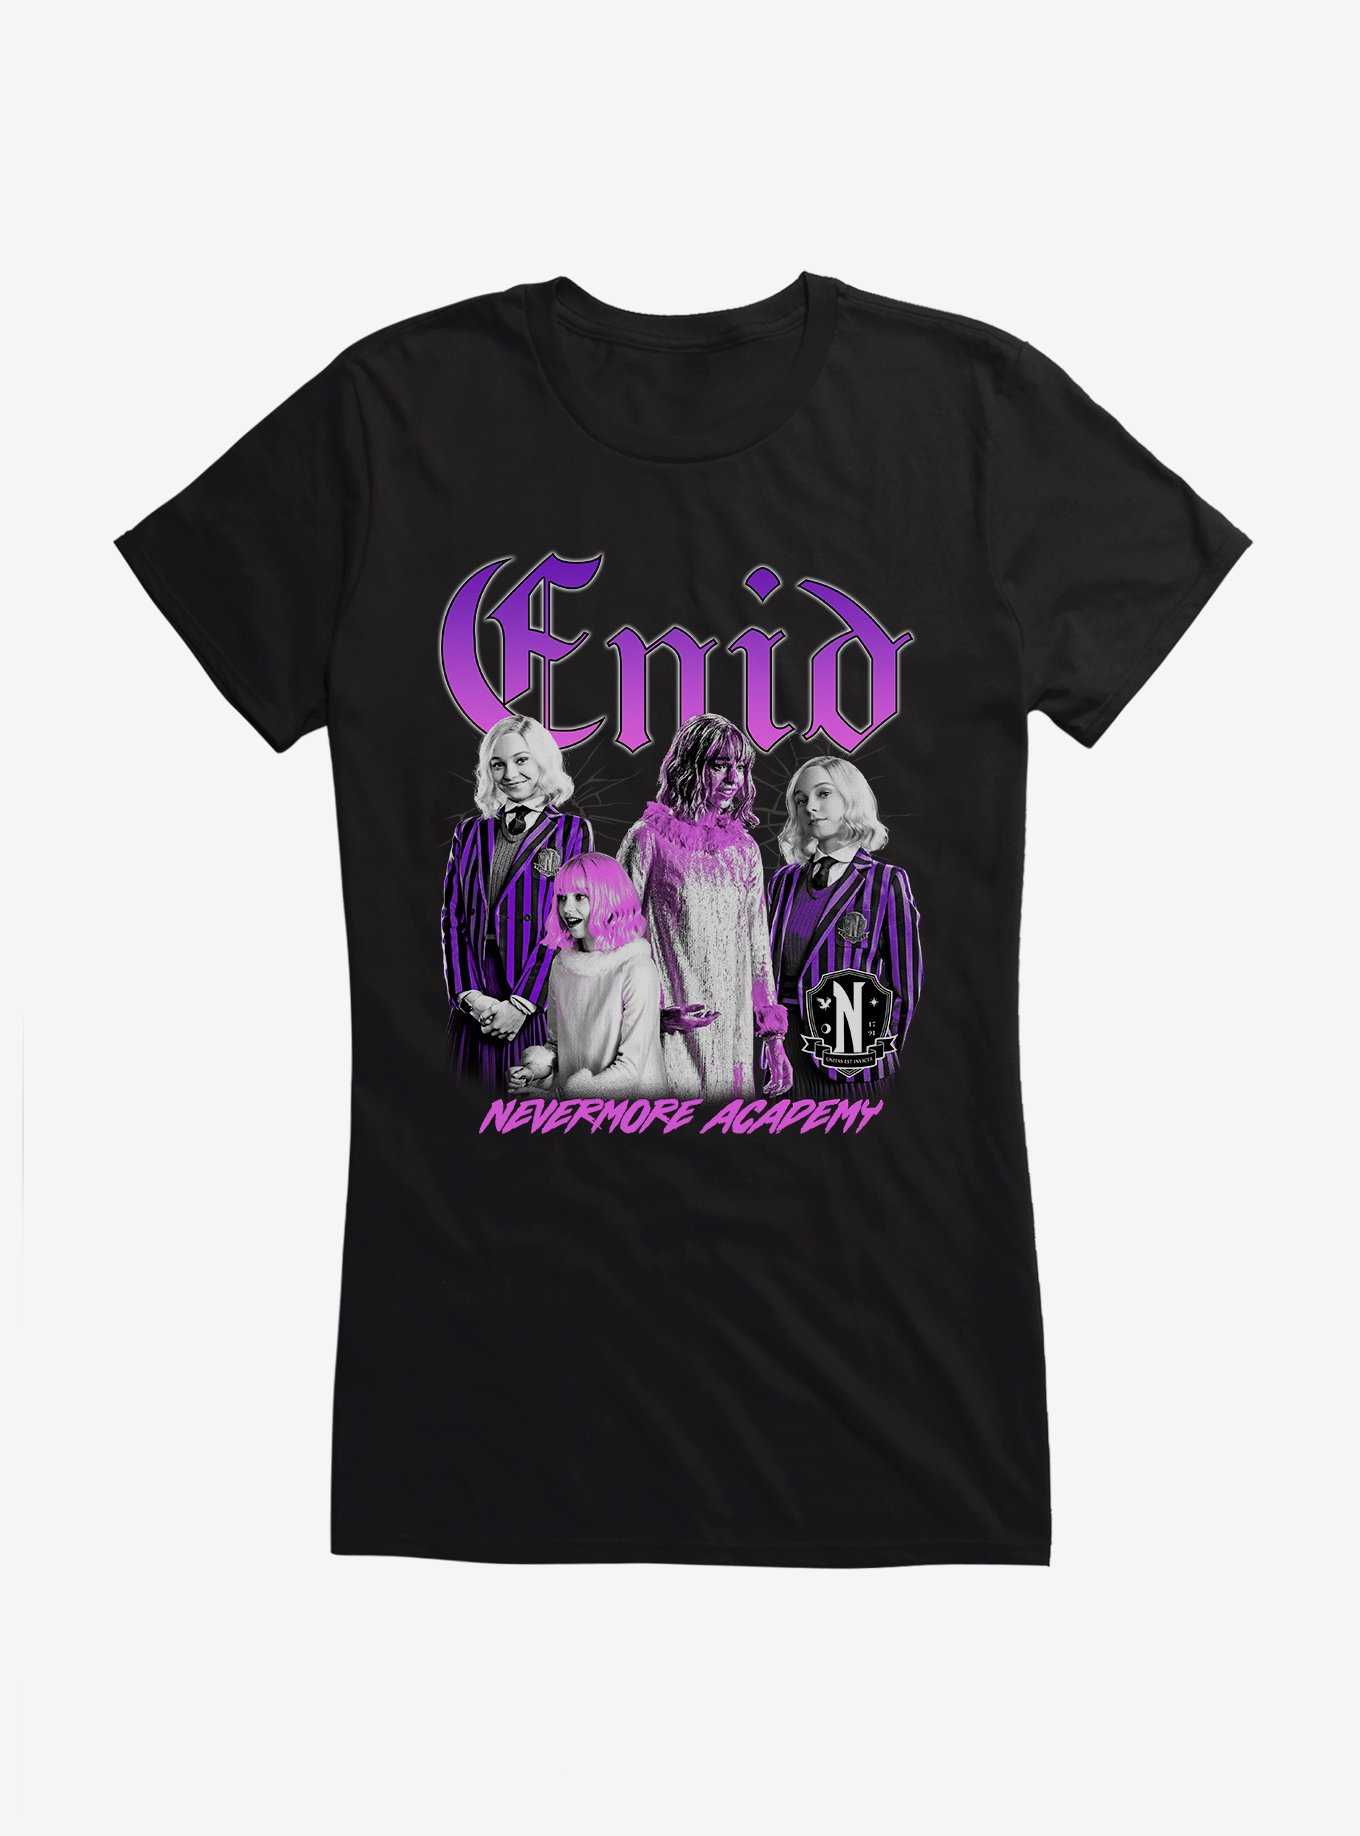 Wednesday Enid Nevermore Academy Girls T-Shirt, , hi-res